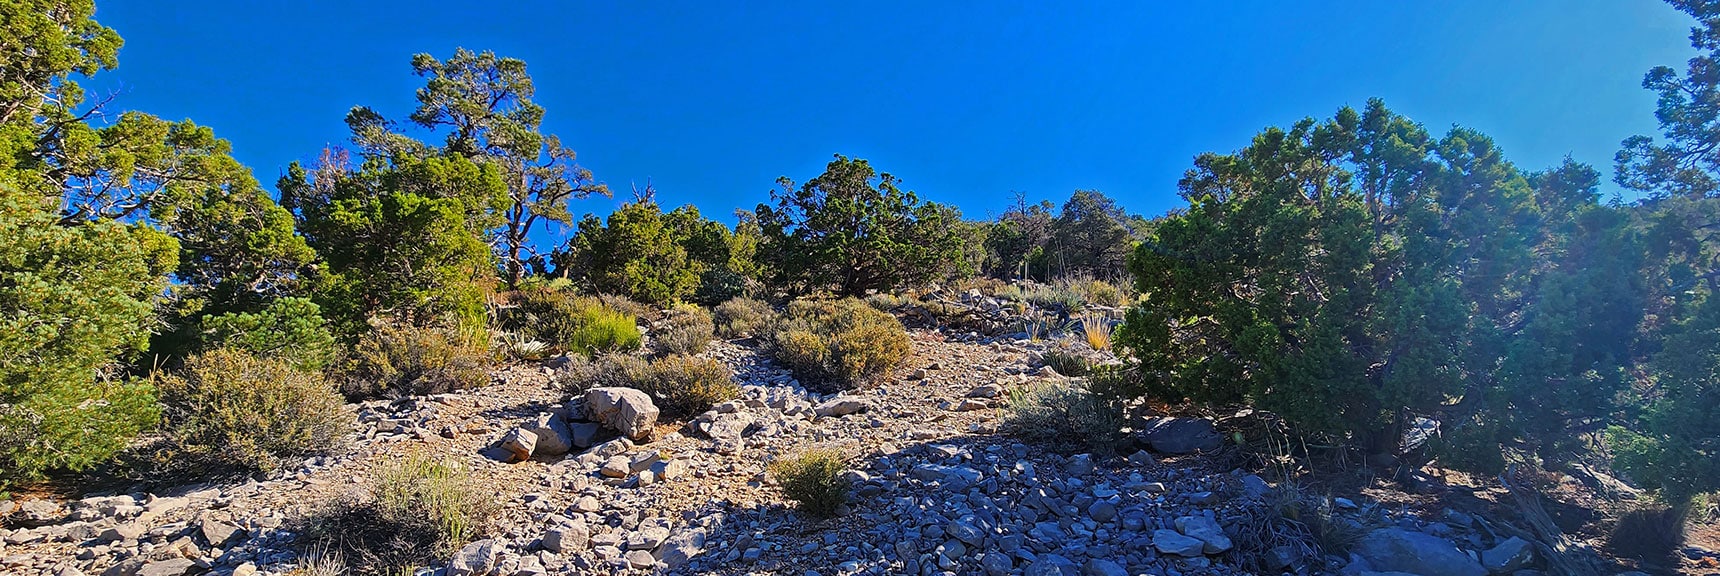 A Way Through the Boulders and Brush Always Opens Up Ahead | Red Rock Summit | Lovell Canyon & Rainbow Mountain Wilderness, Nevada